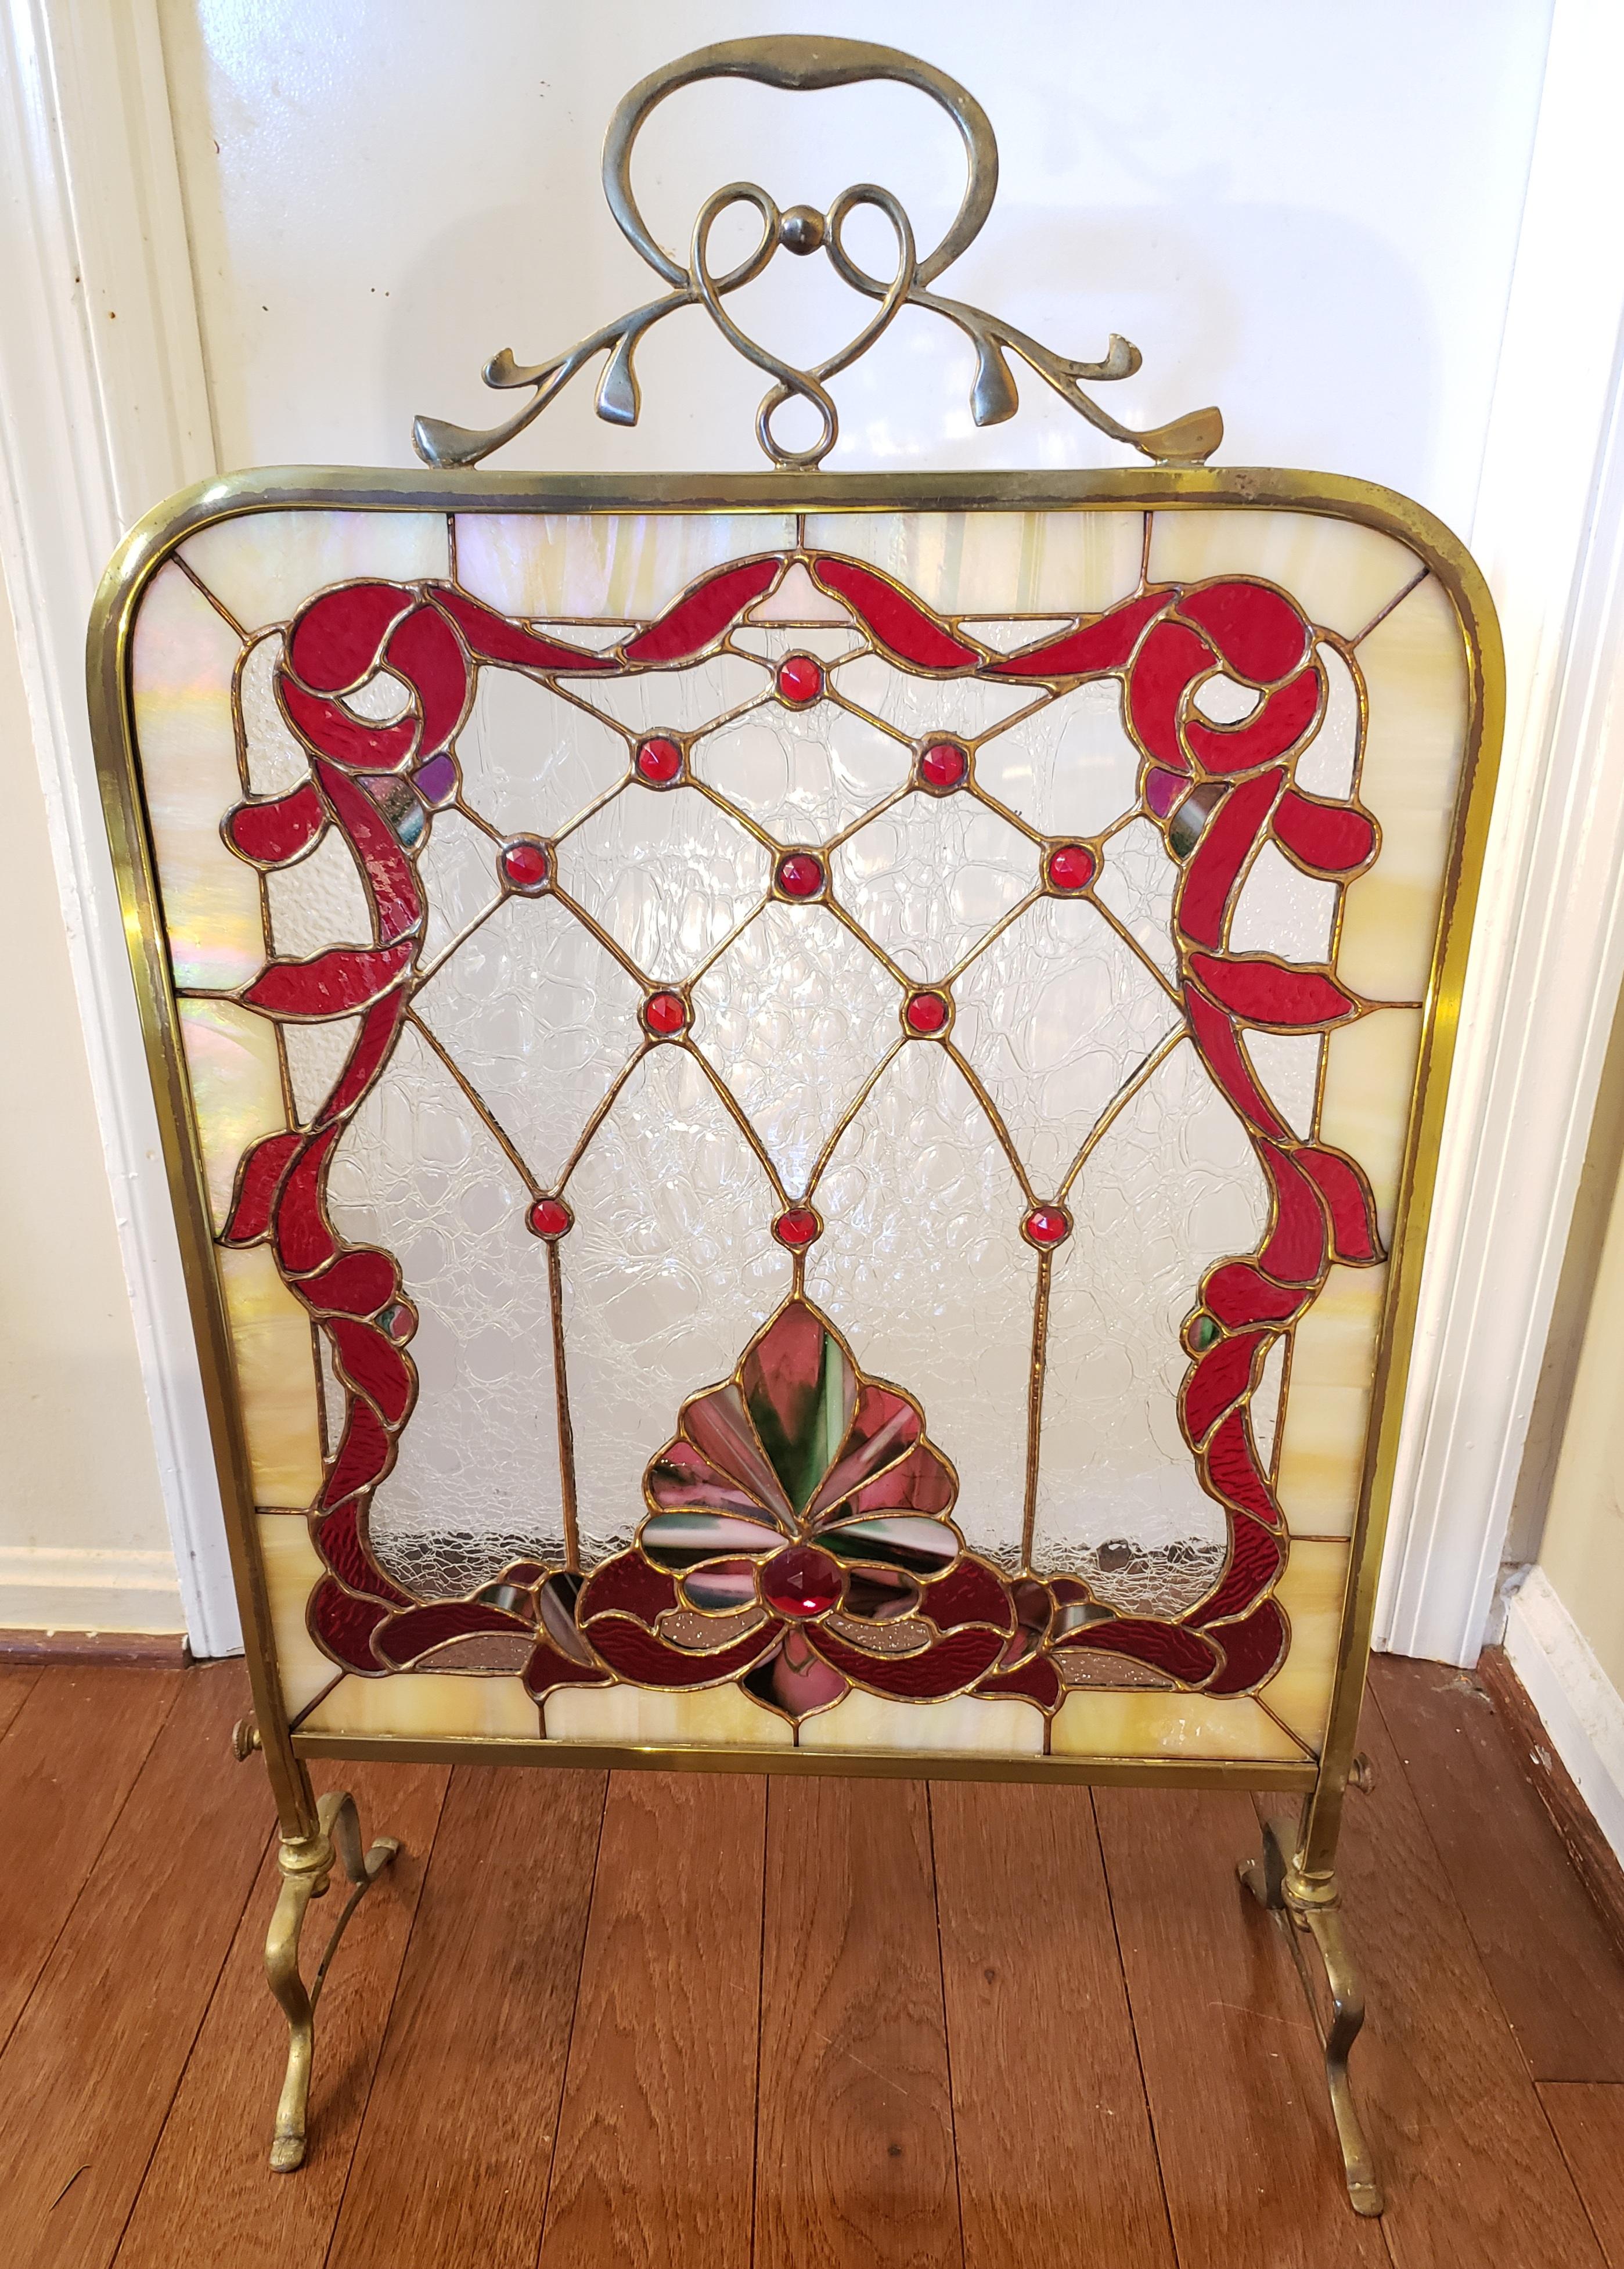 Edwardian period custom made leaded stained glass fire place screen in brass frame.
Great condition. 
Measures 18.75